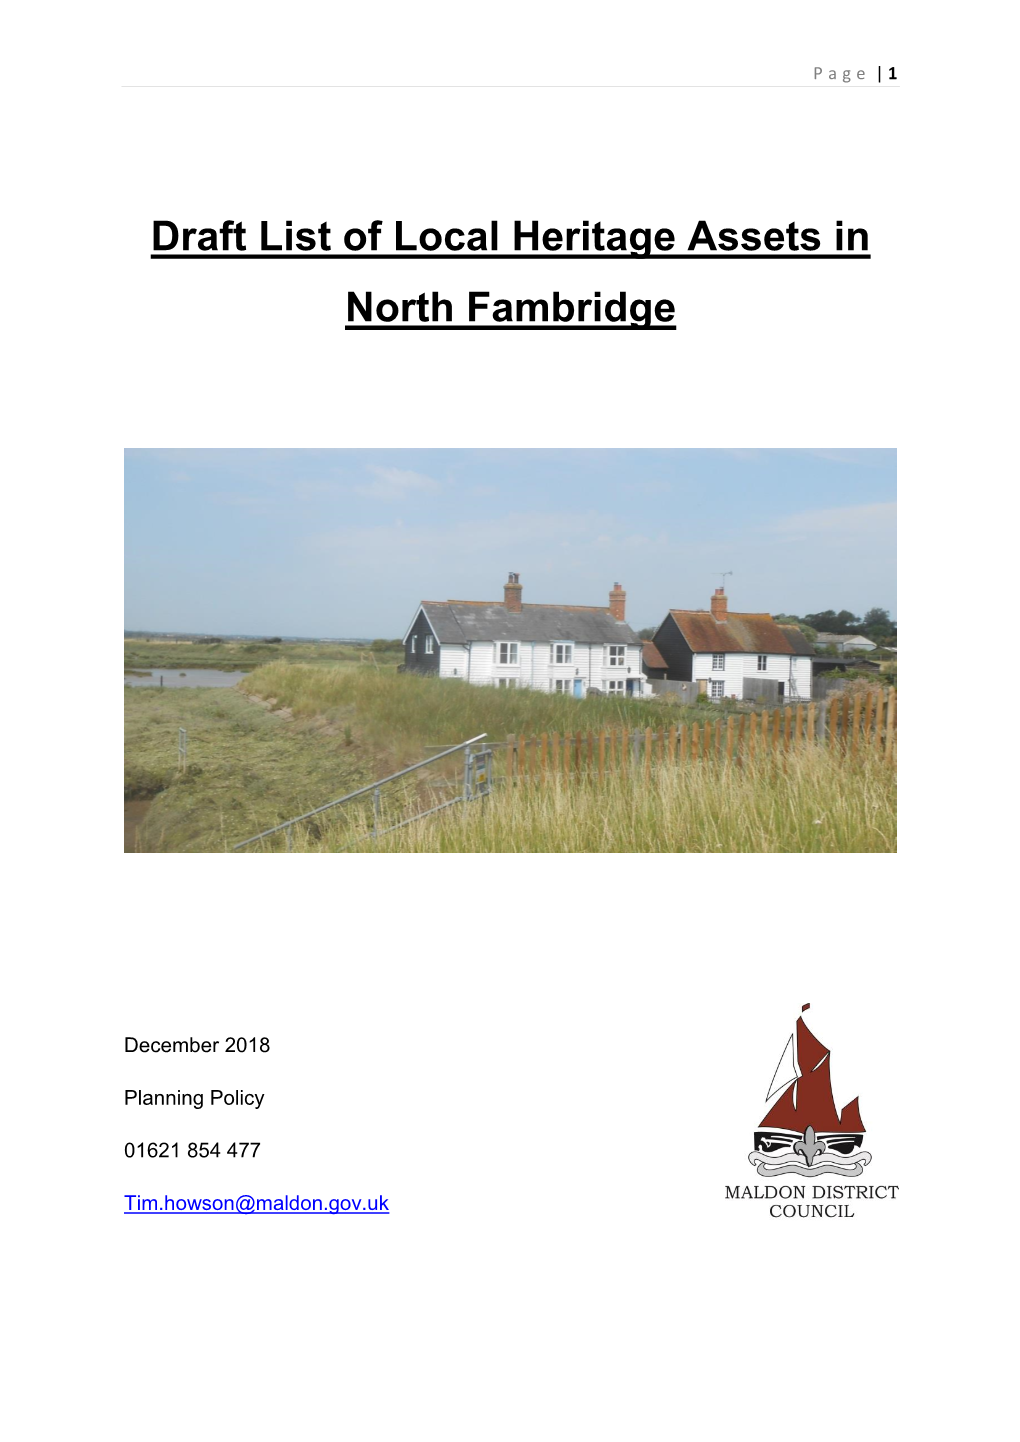 Draft List of Local Heritage Assets in North Fambridge